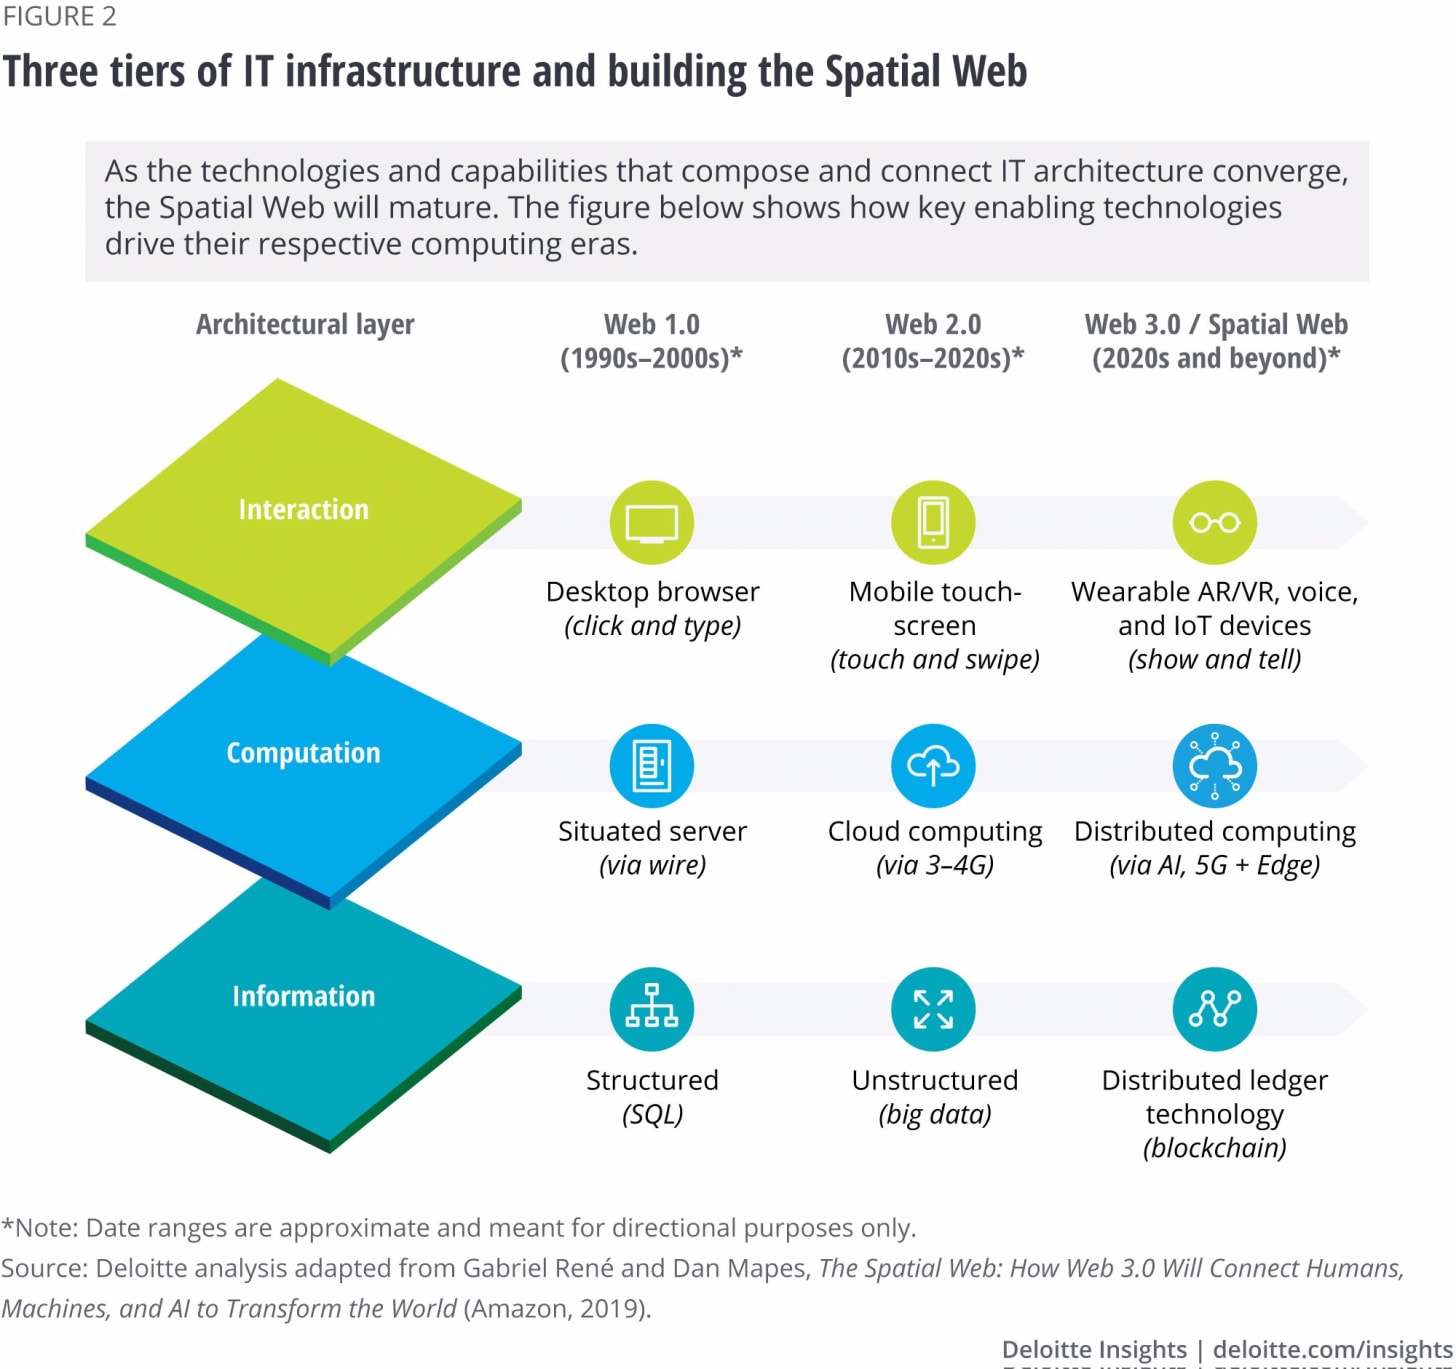 Three tiers of IT infrastructure and building the Spatial Web